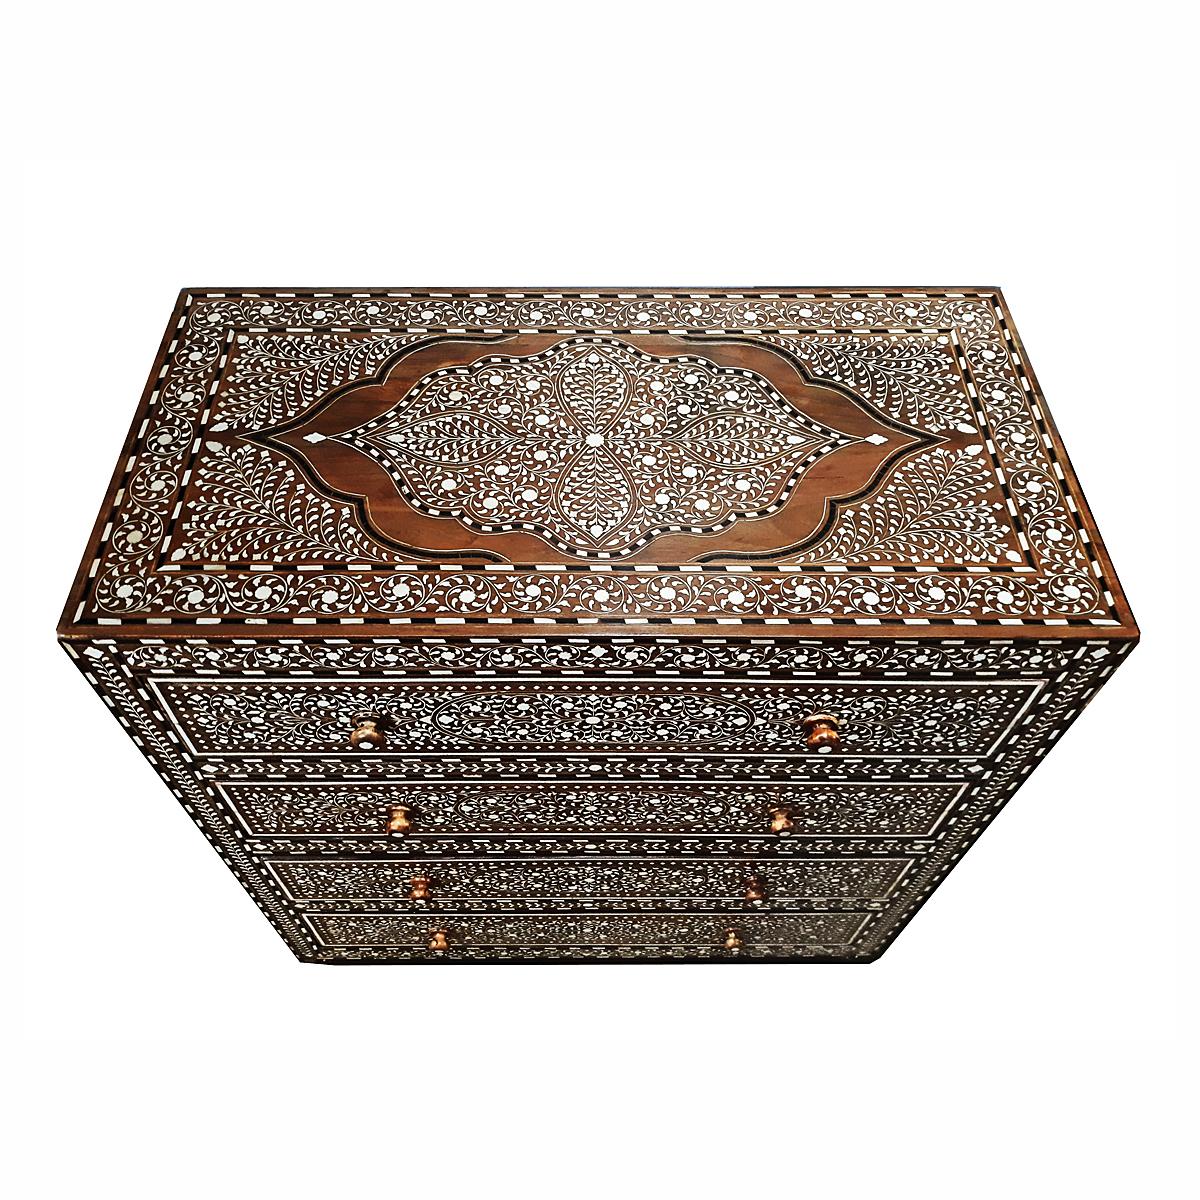 Contemporary Bone-Inlaid Teak Chest of Drawers from India